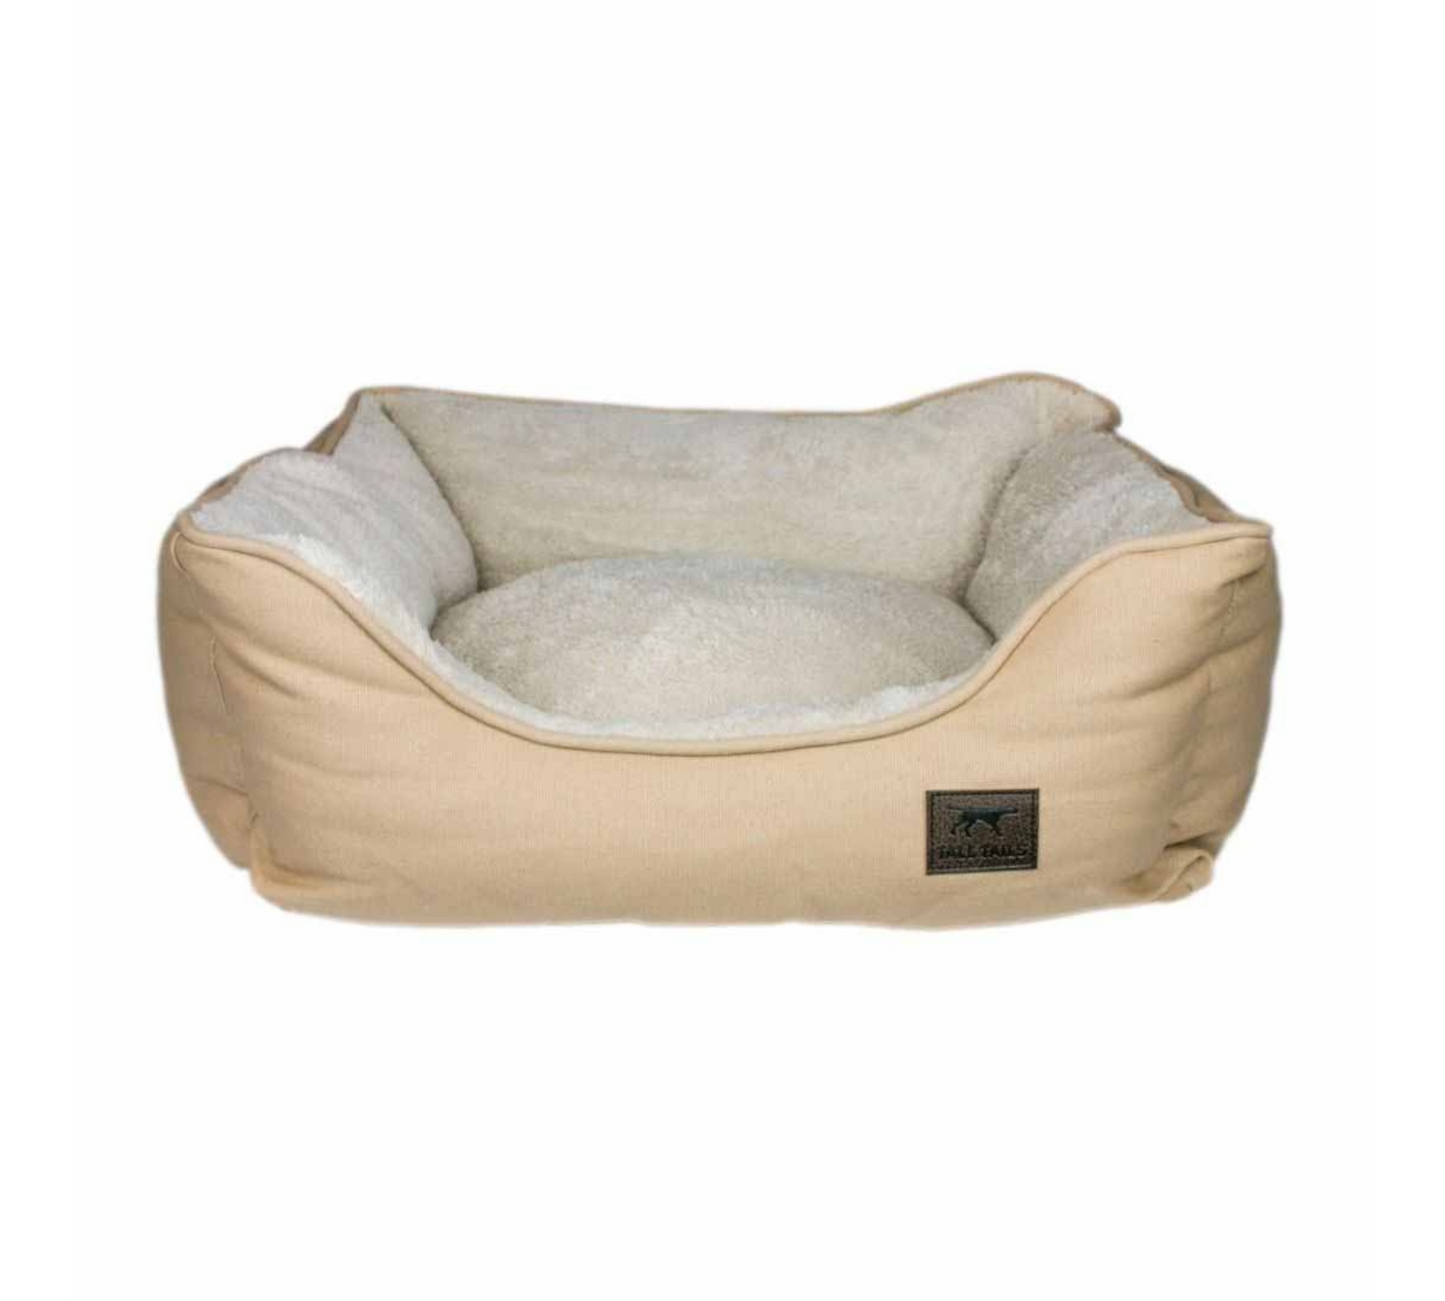 Canine's World Pillow Bed Tall Tails Dog Bolster Bed Khaki Tall Tails